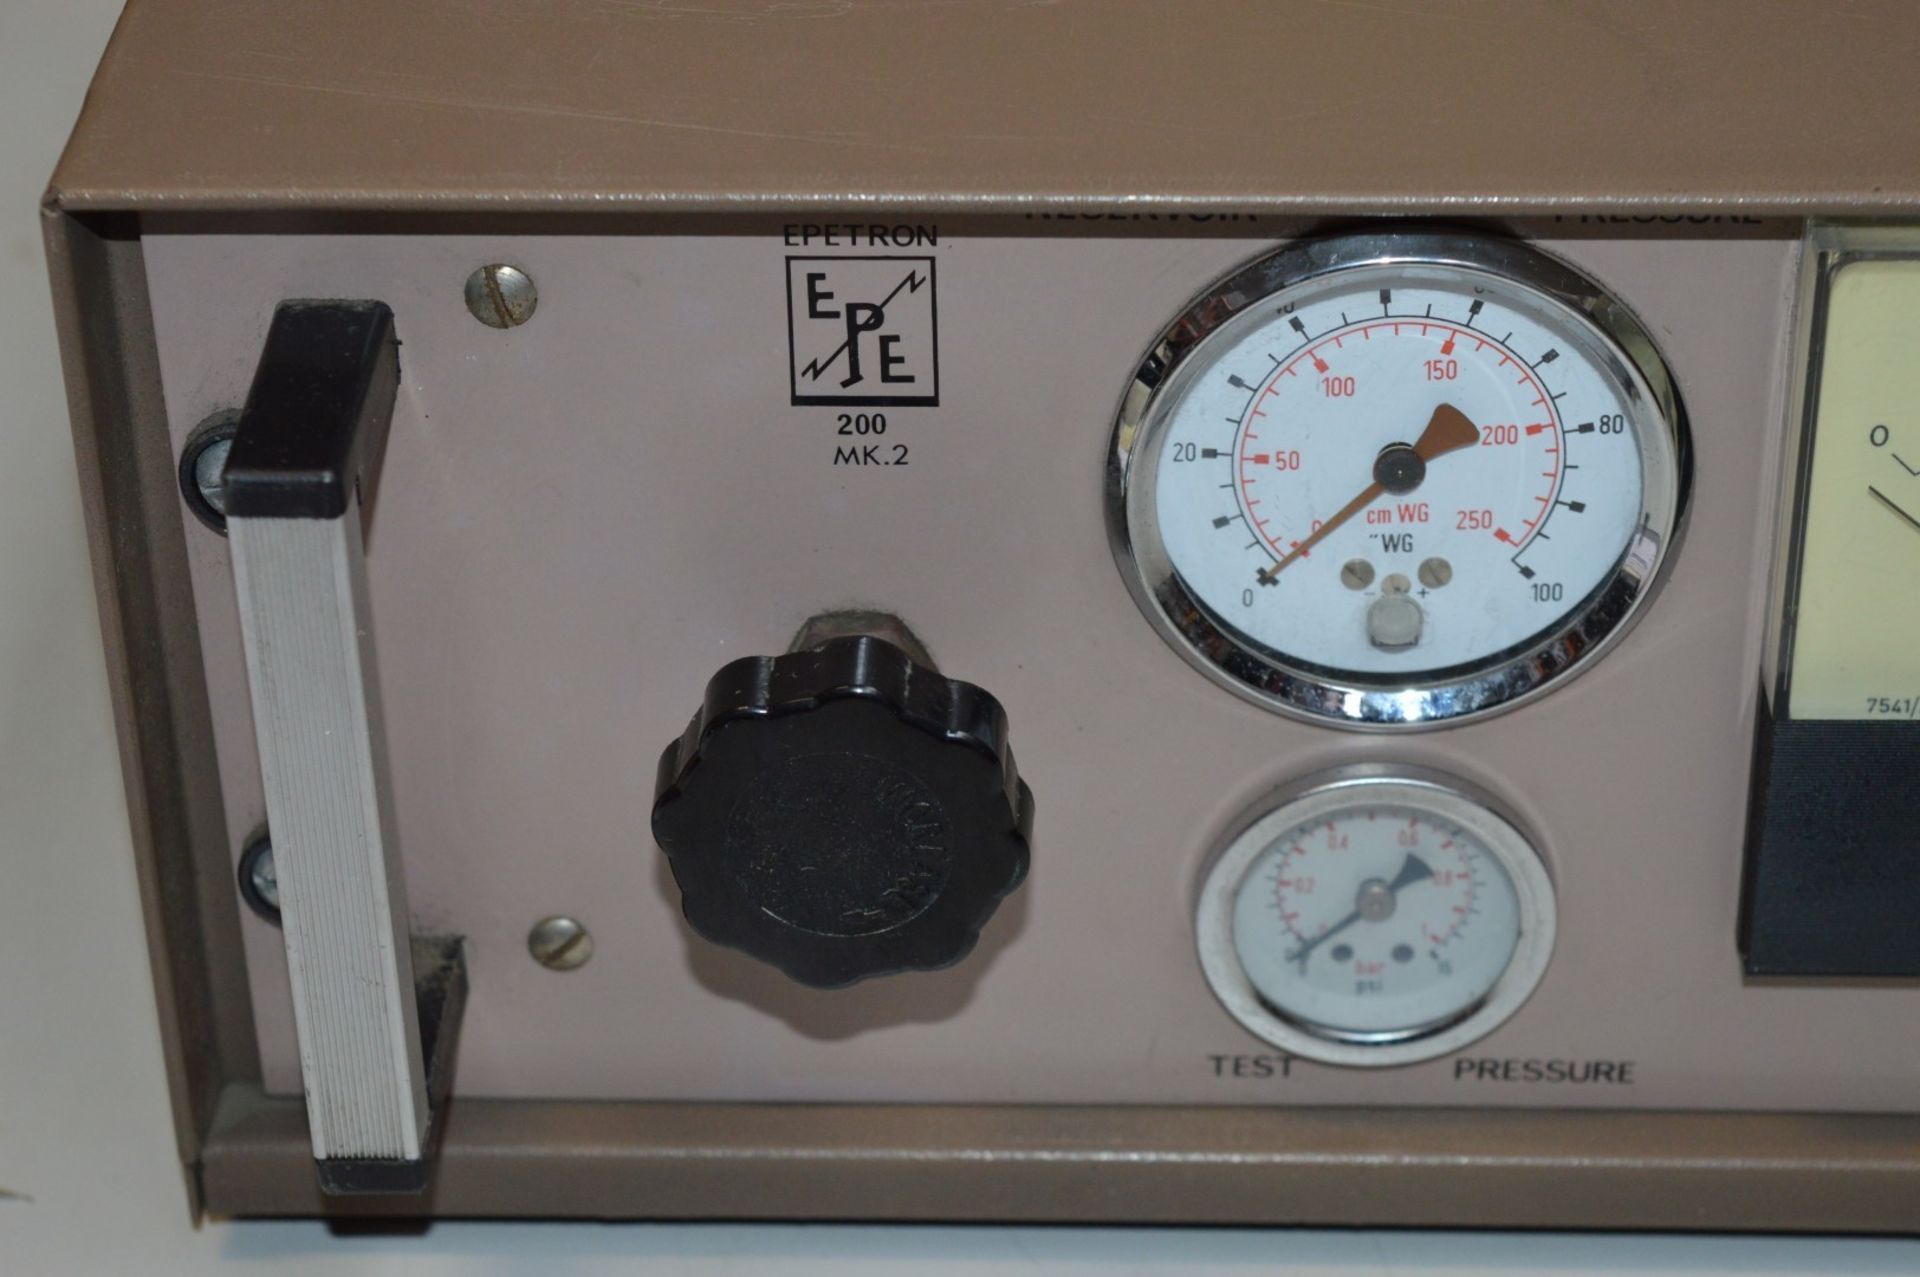 1 x Epetron 200 Mk2 Electro Pneumatic Tester - Vintage Test Equipment - CL011 - Ref J611 - Location: - Image 2 of 8